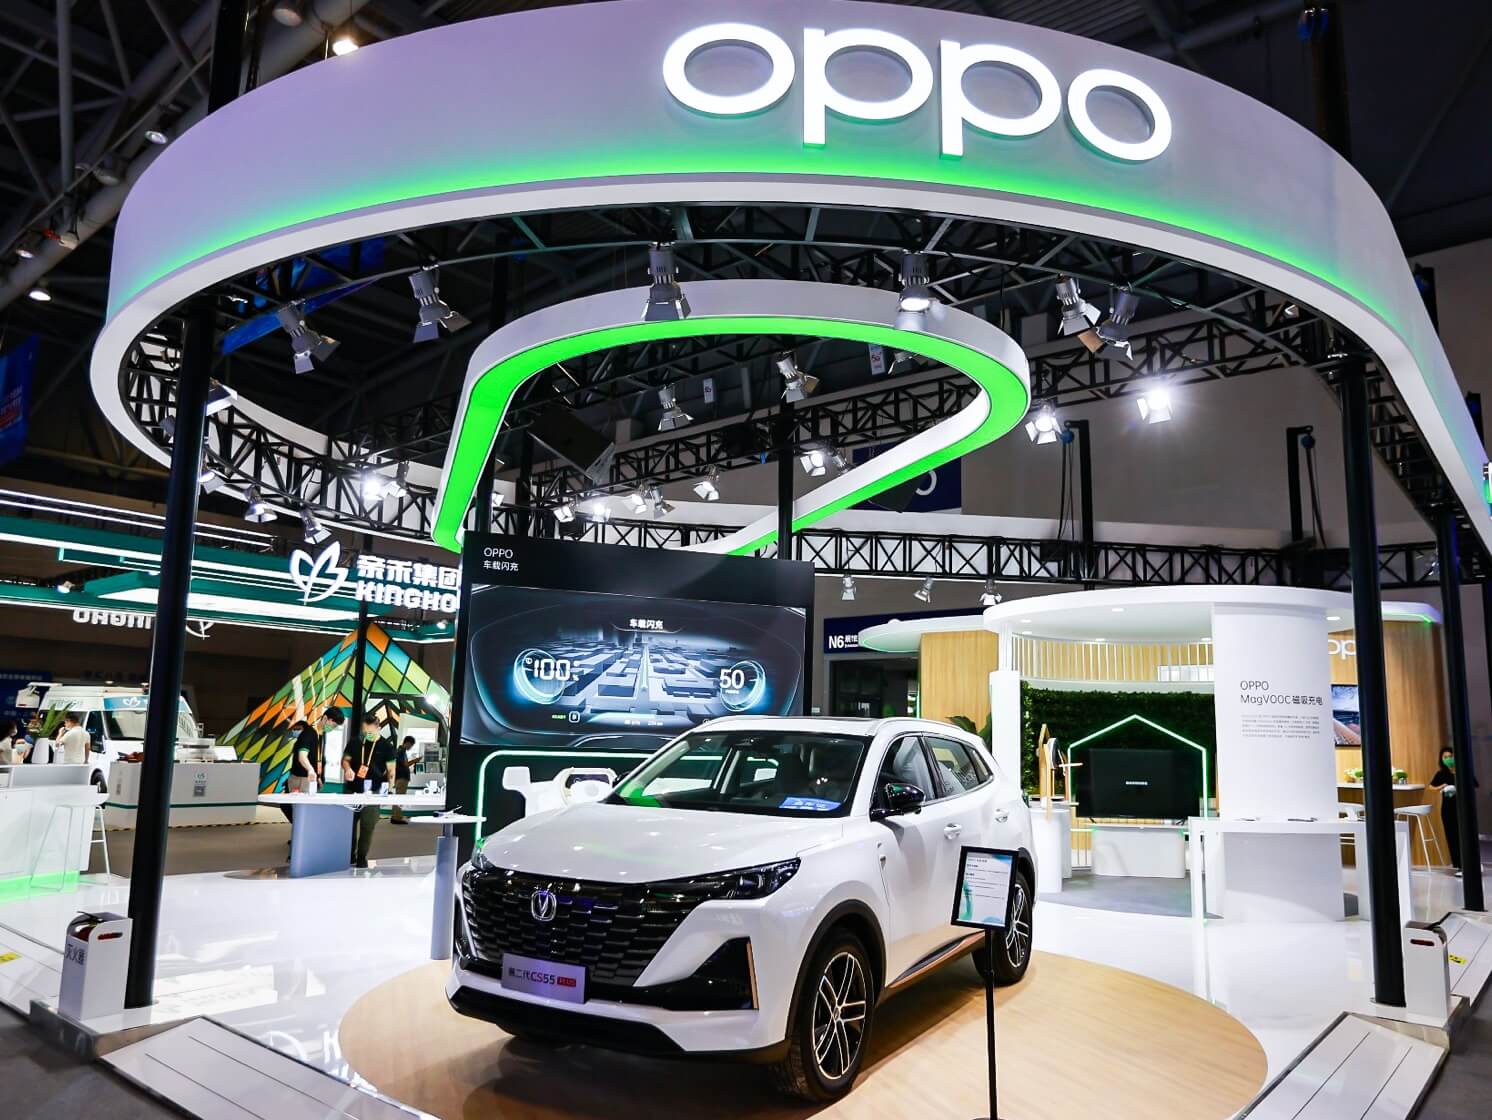 OPPO opens in-car phone connectivity capabilities to car brands